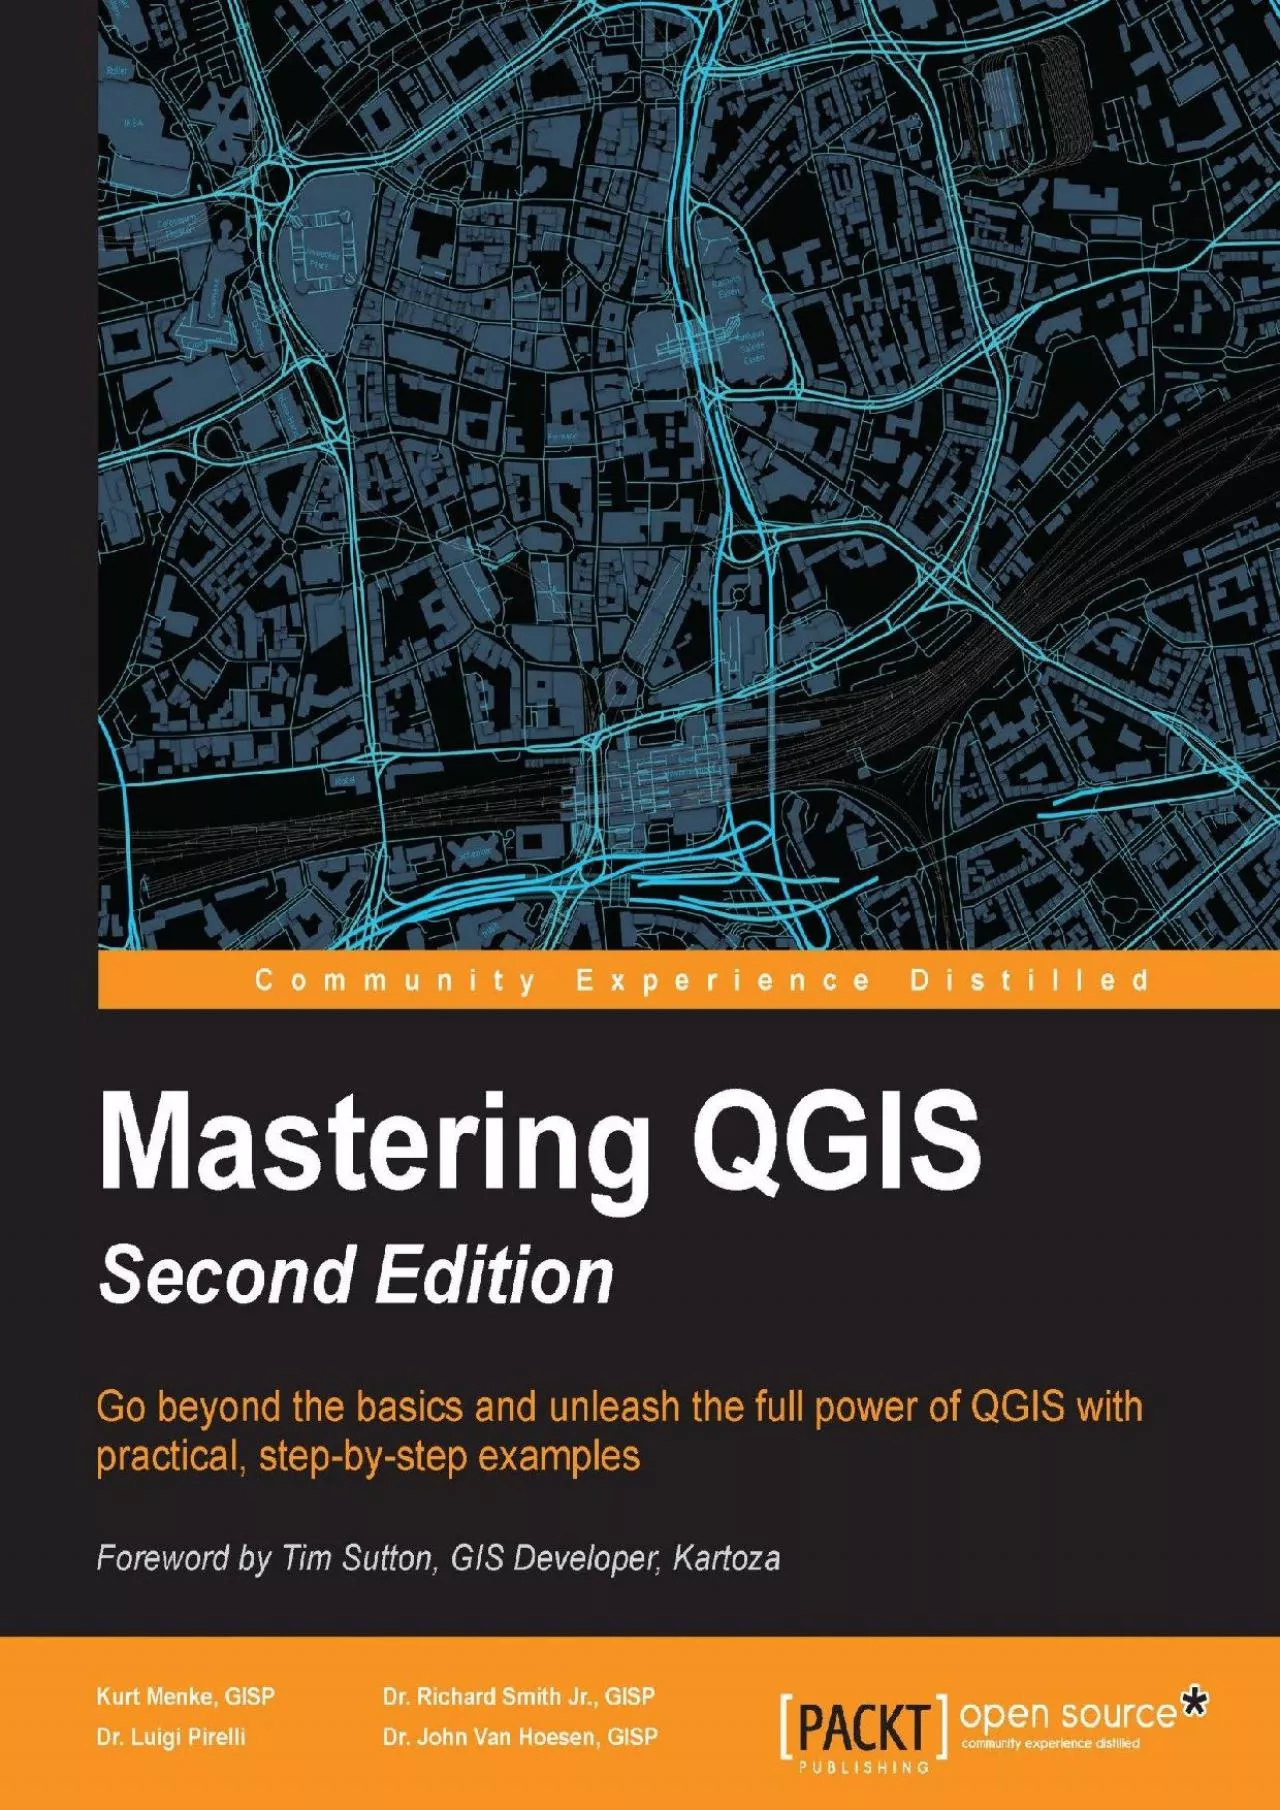 [FREE]-Mastering QGIS - Second Edition Go beyond the basics and unleash the full power